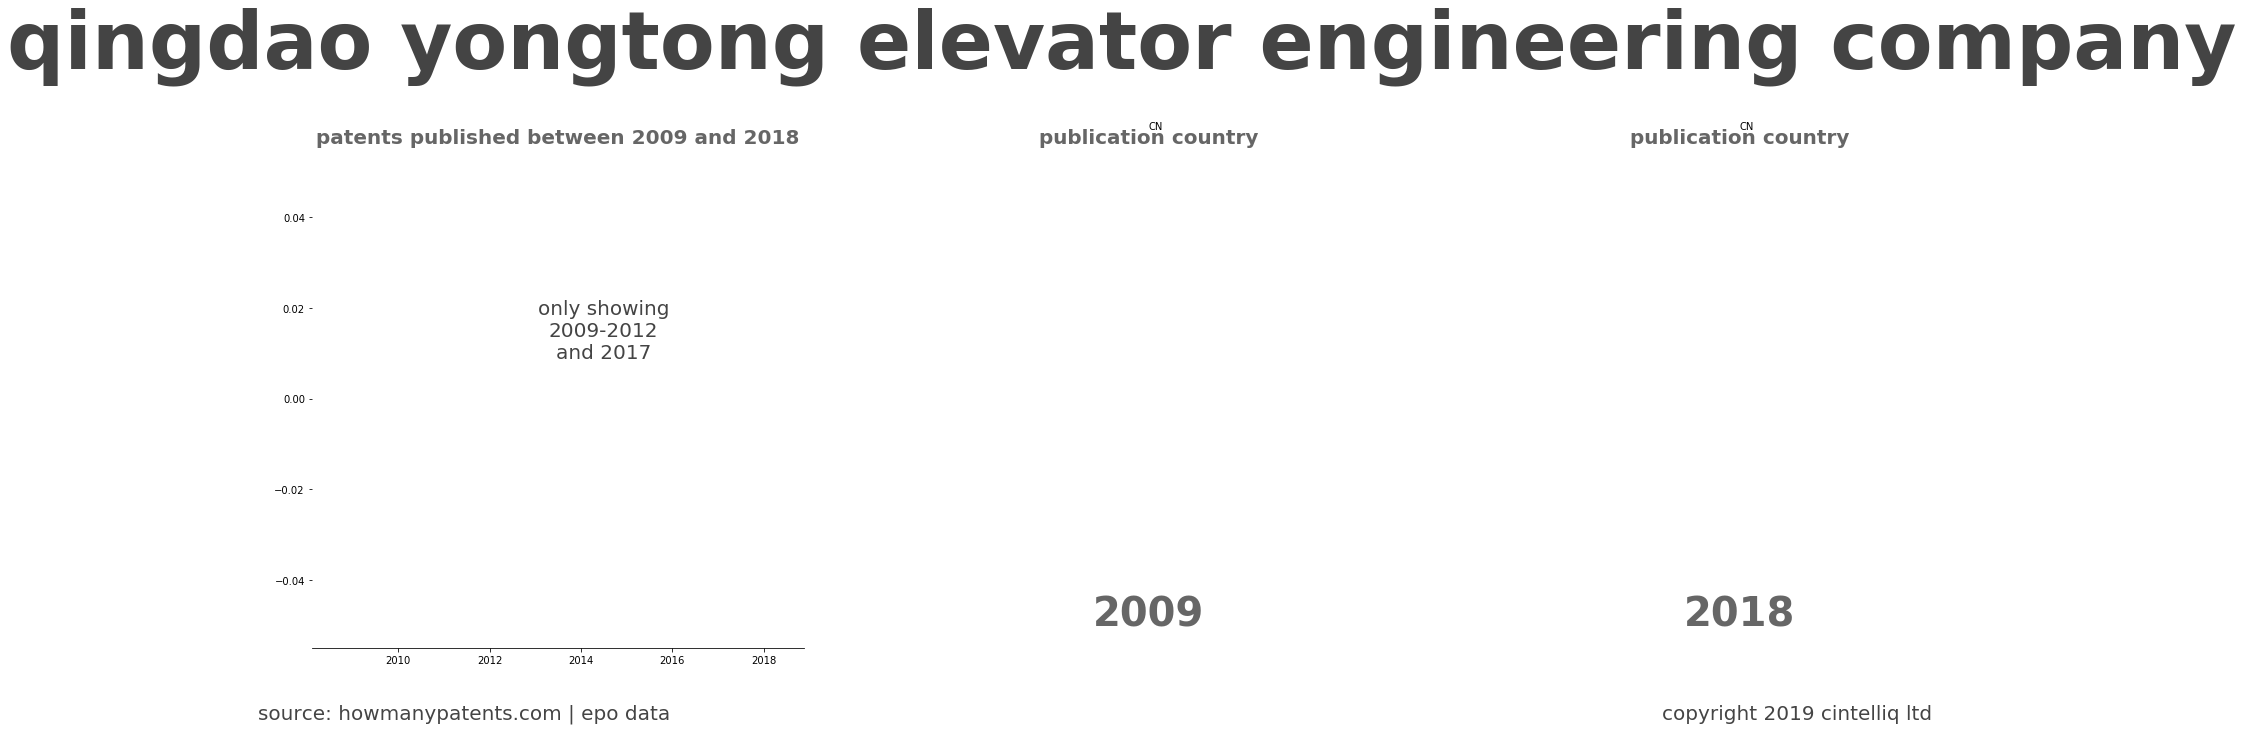 summary of patents for Qingdao Yongtong Elevator Engineering Company